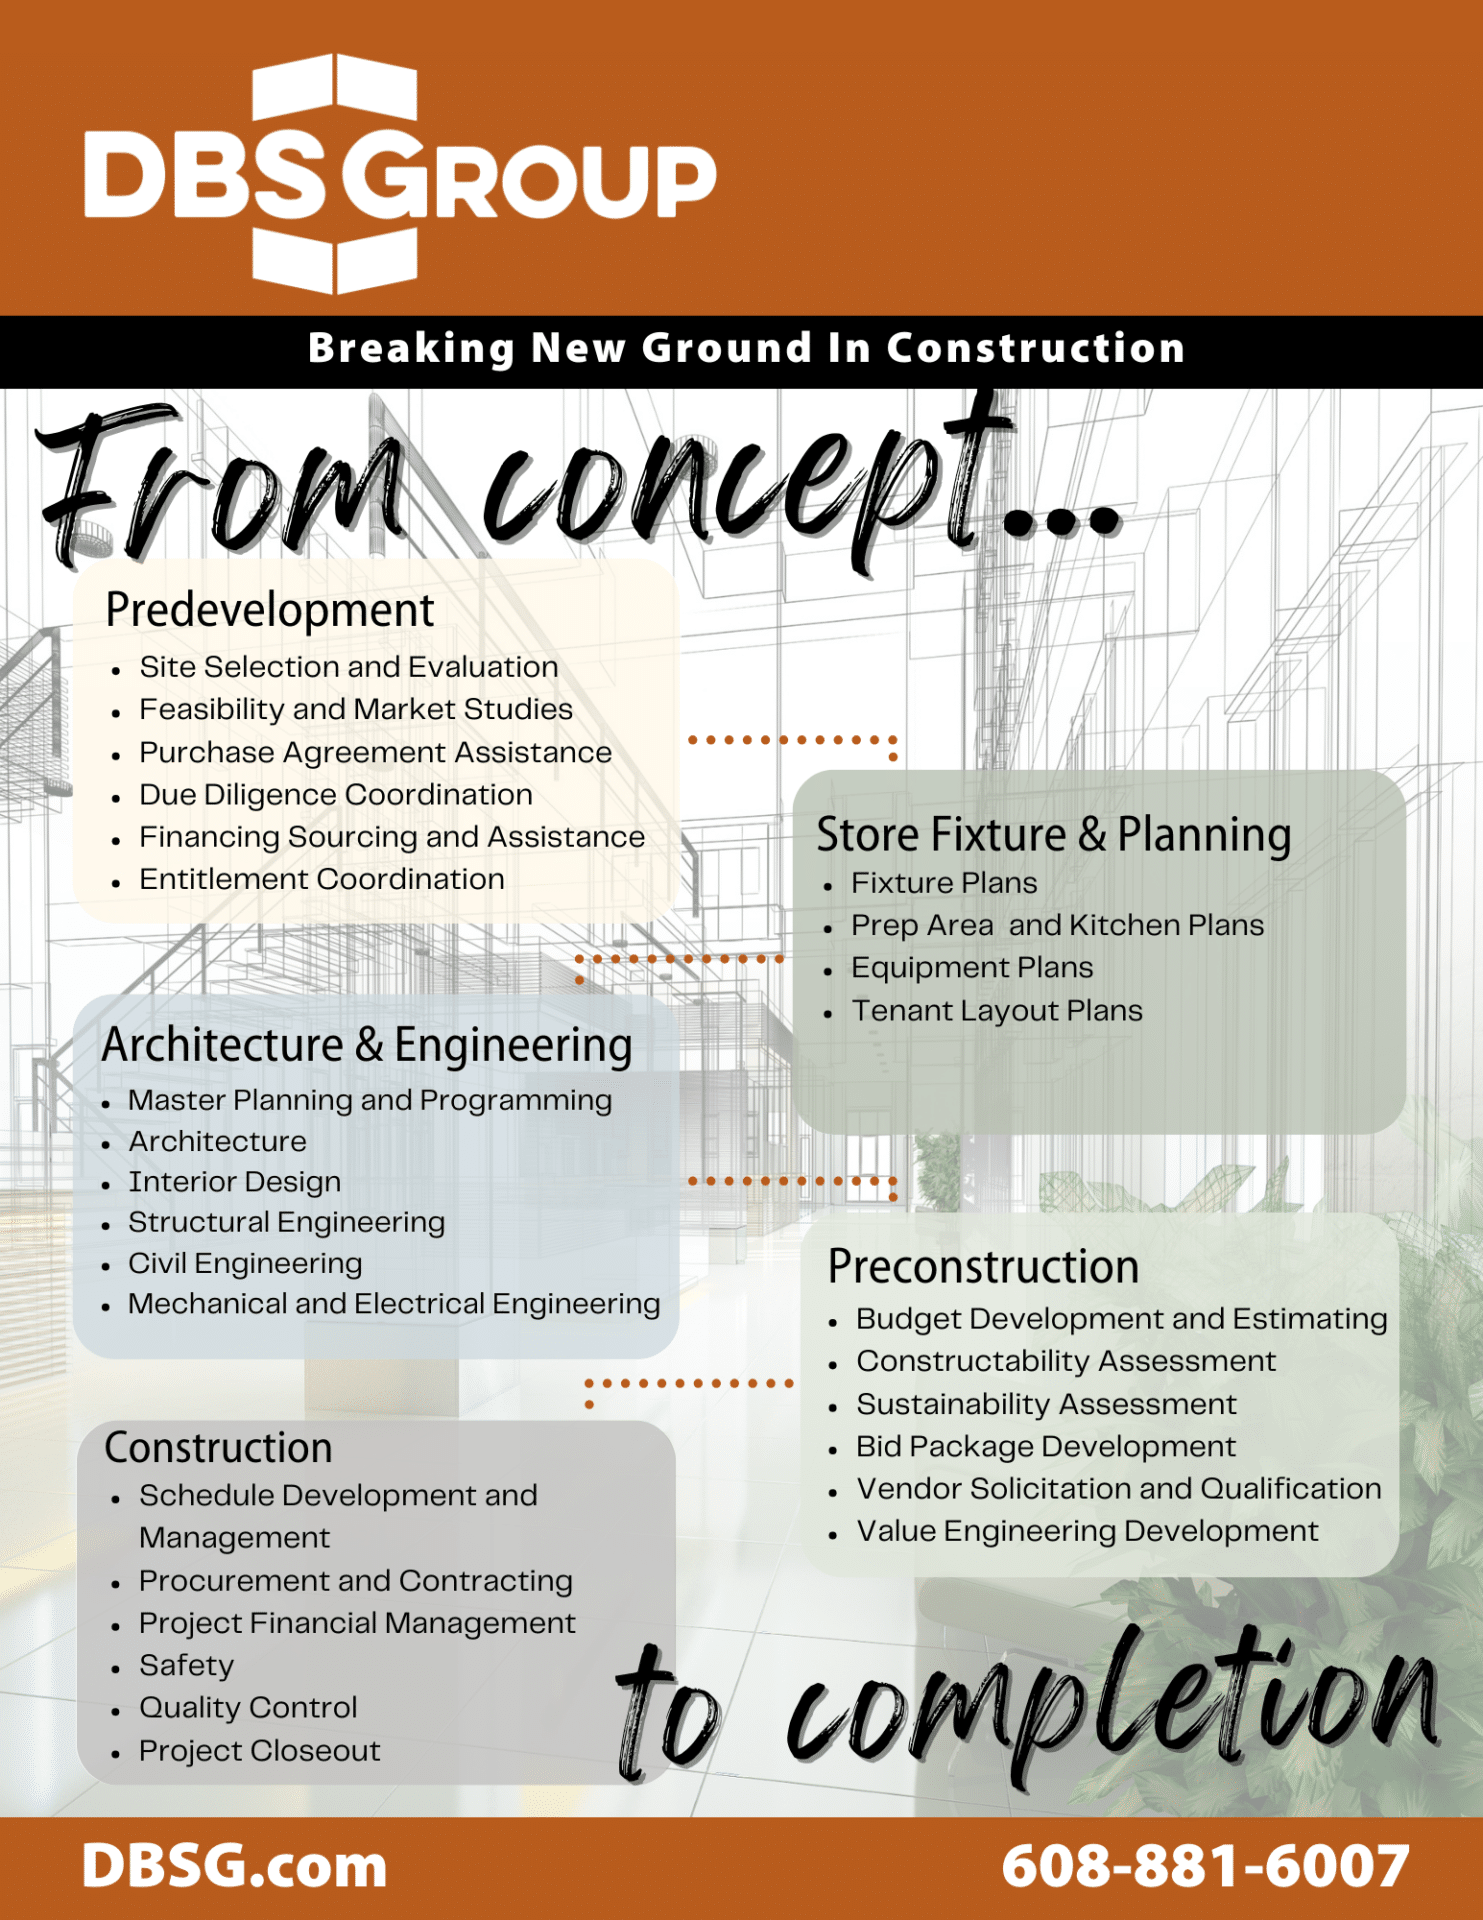 From concept to completion infographic